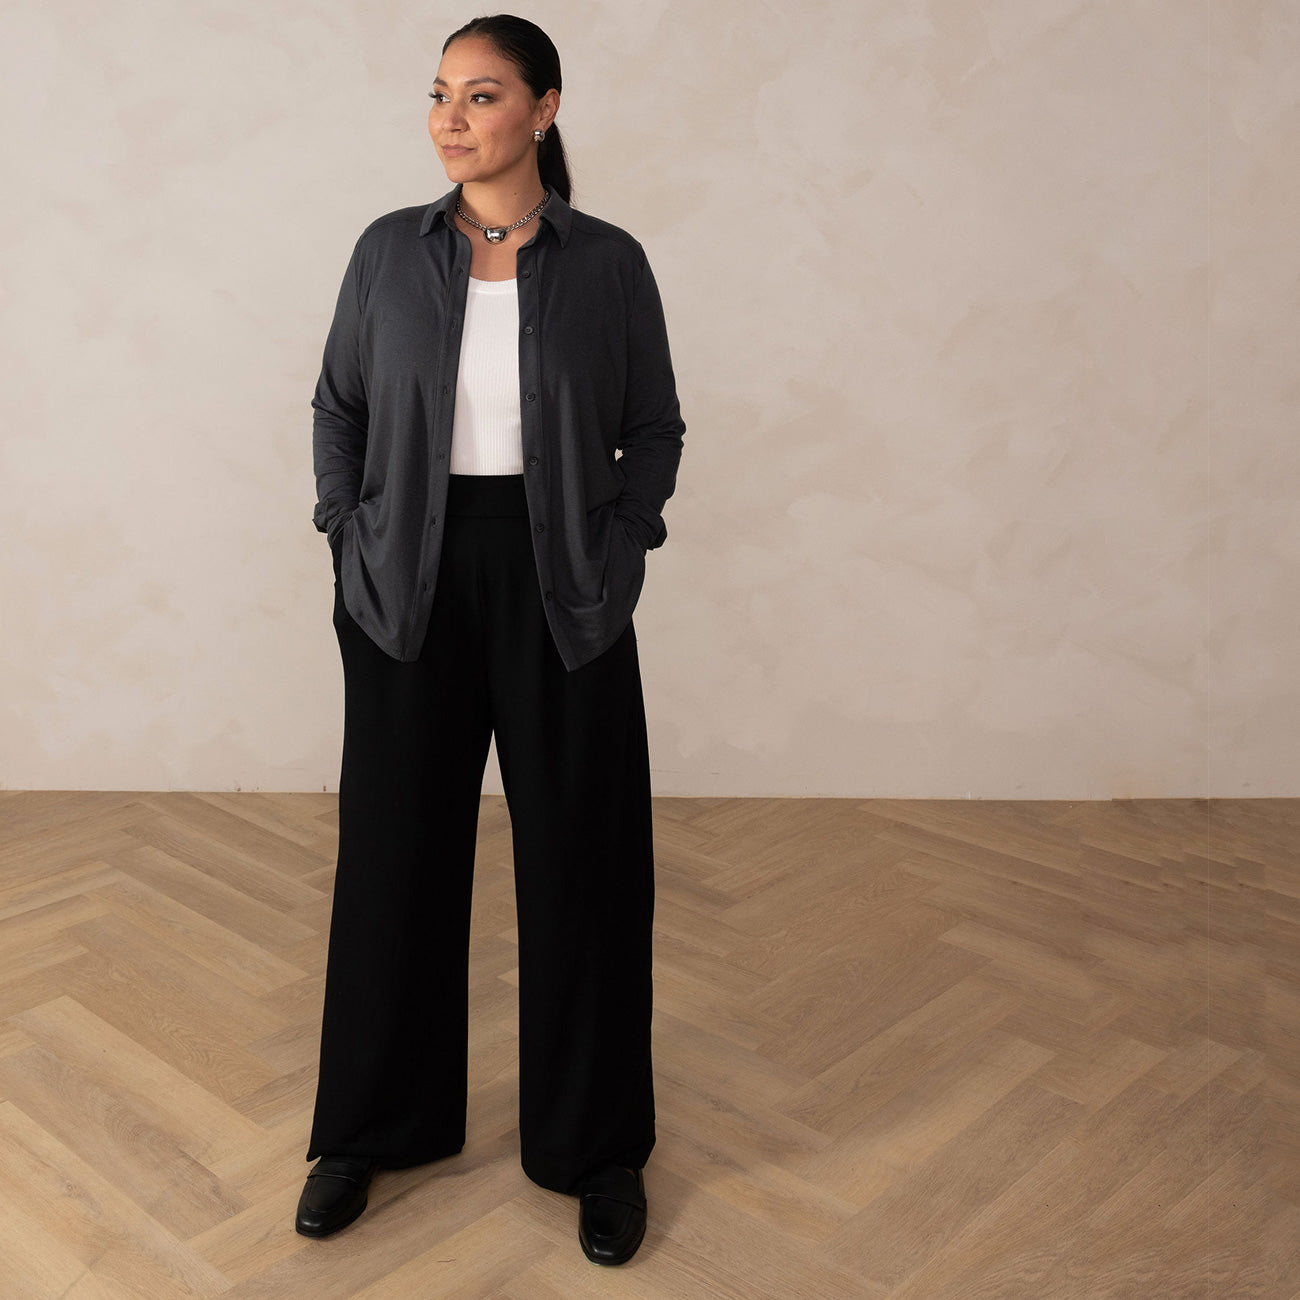 Here's All The Inspiration You Need To Start Rocking Wide-Leg Pants This  Year - Cultura Colectiva